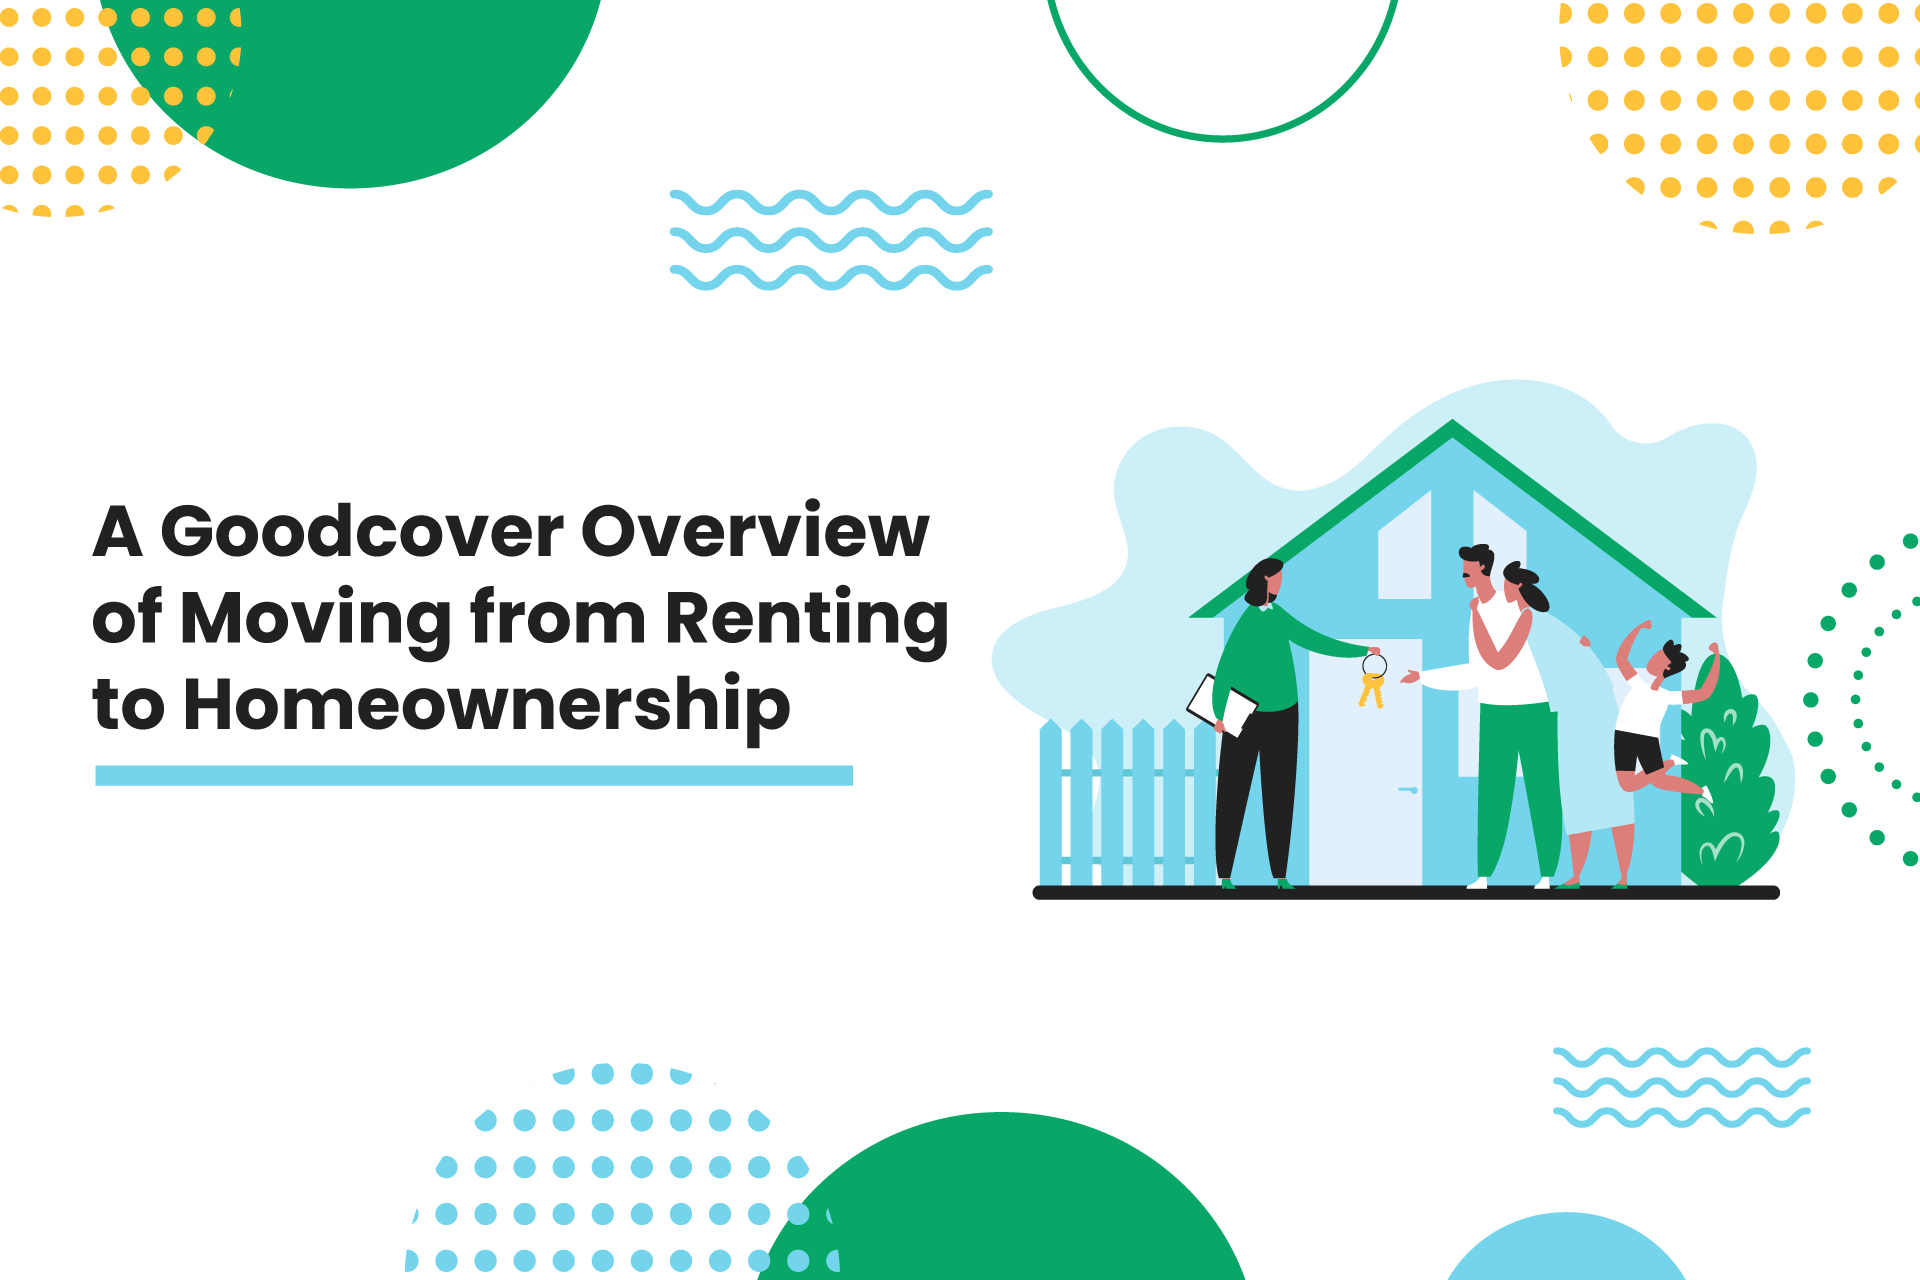 A Goodcover Overview of Moving from Renting to Homeownership.